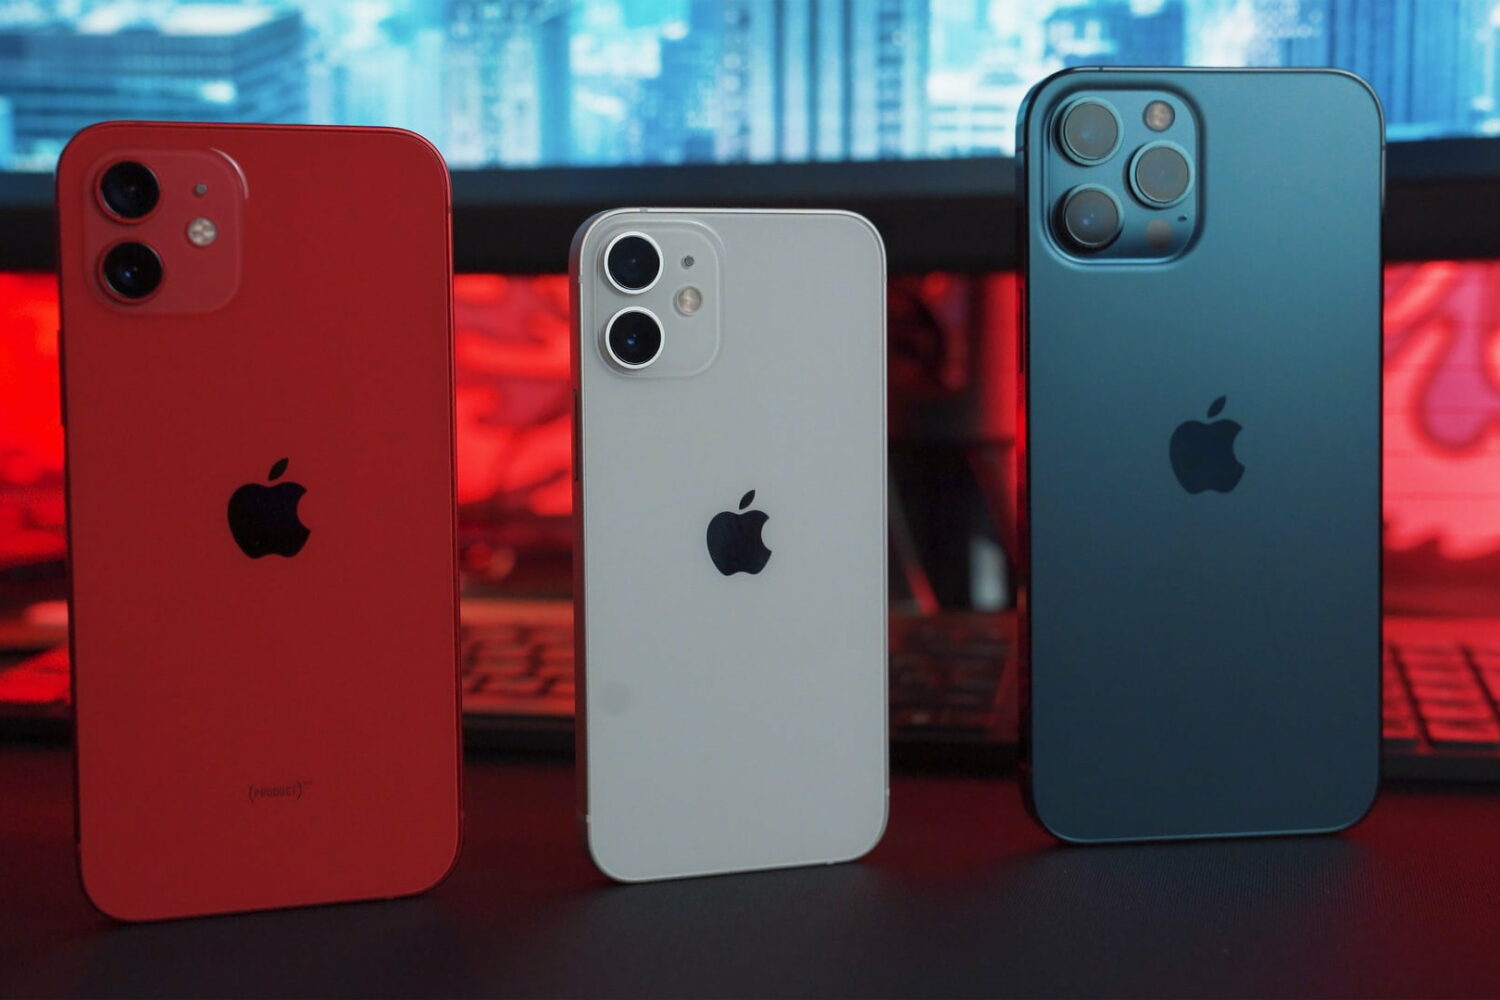 Three iPhones side by side, showing their backs